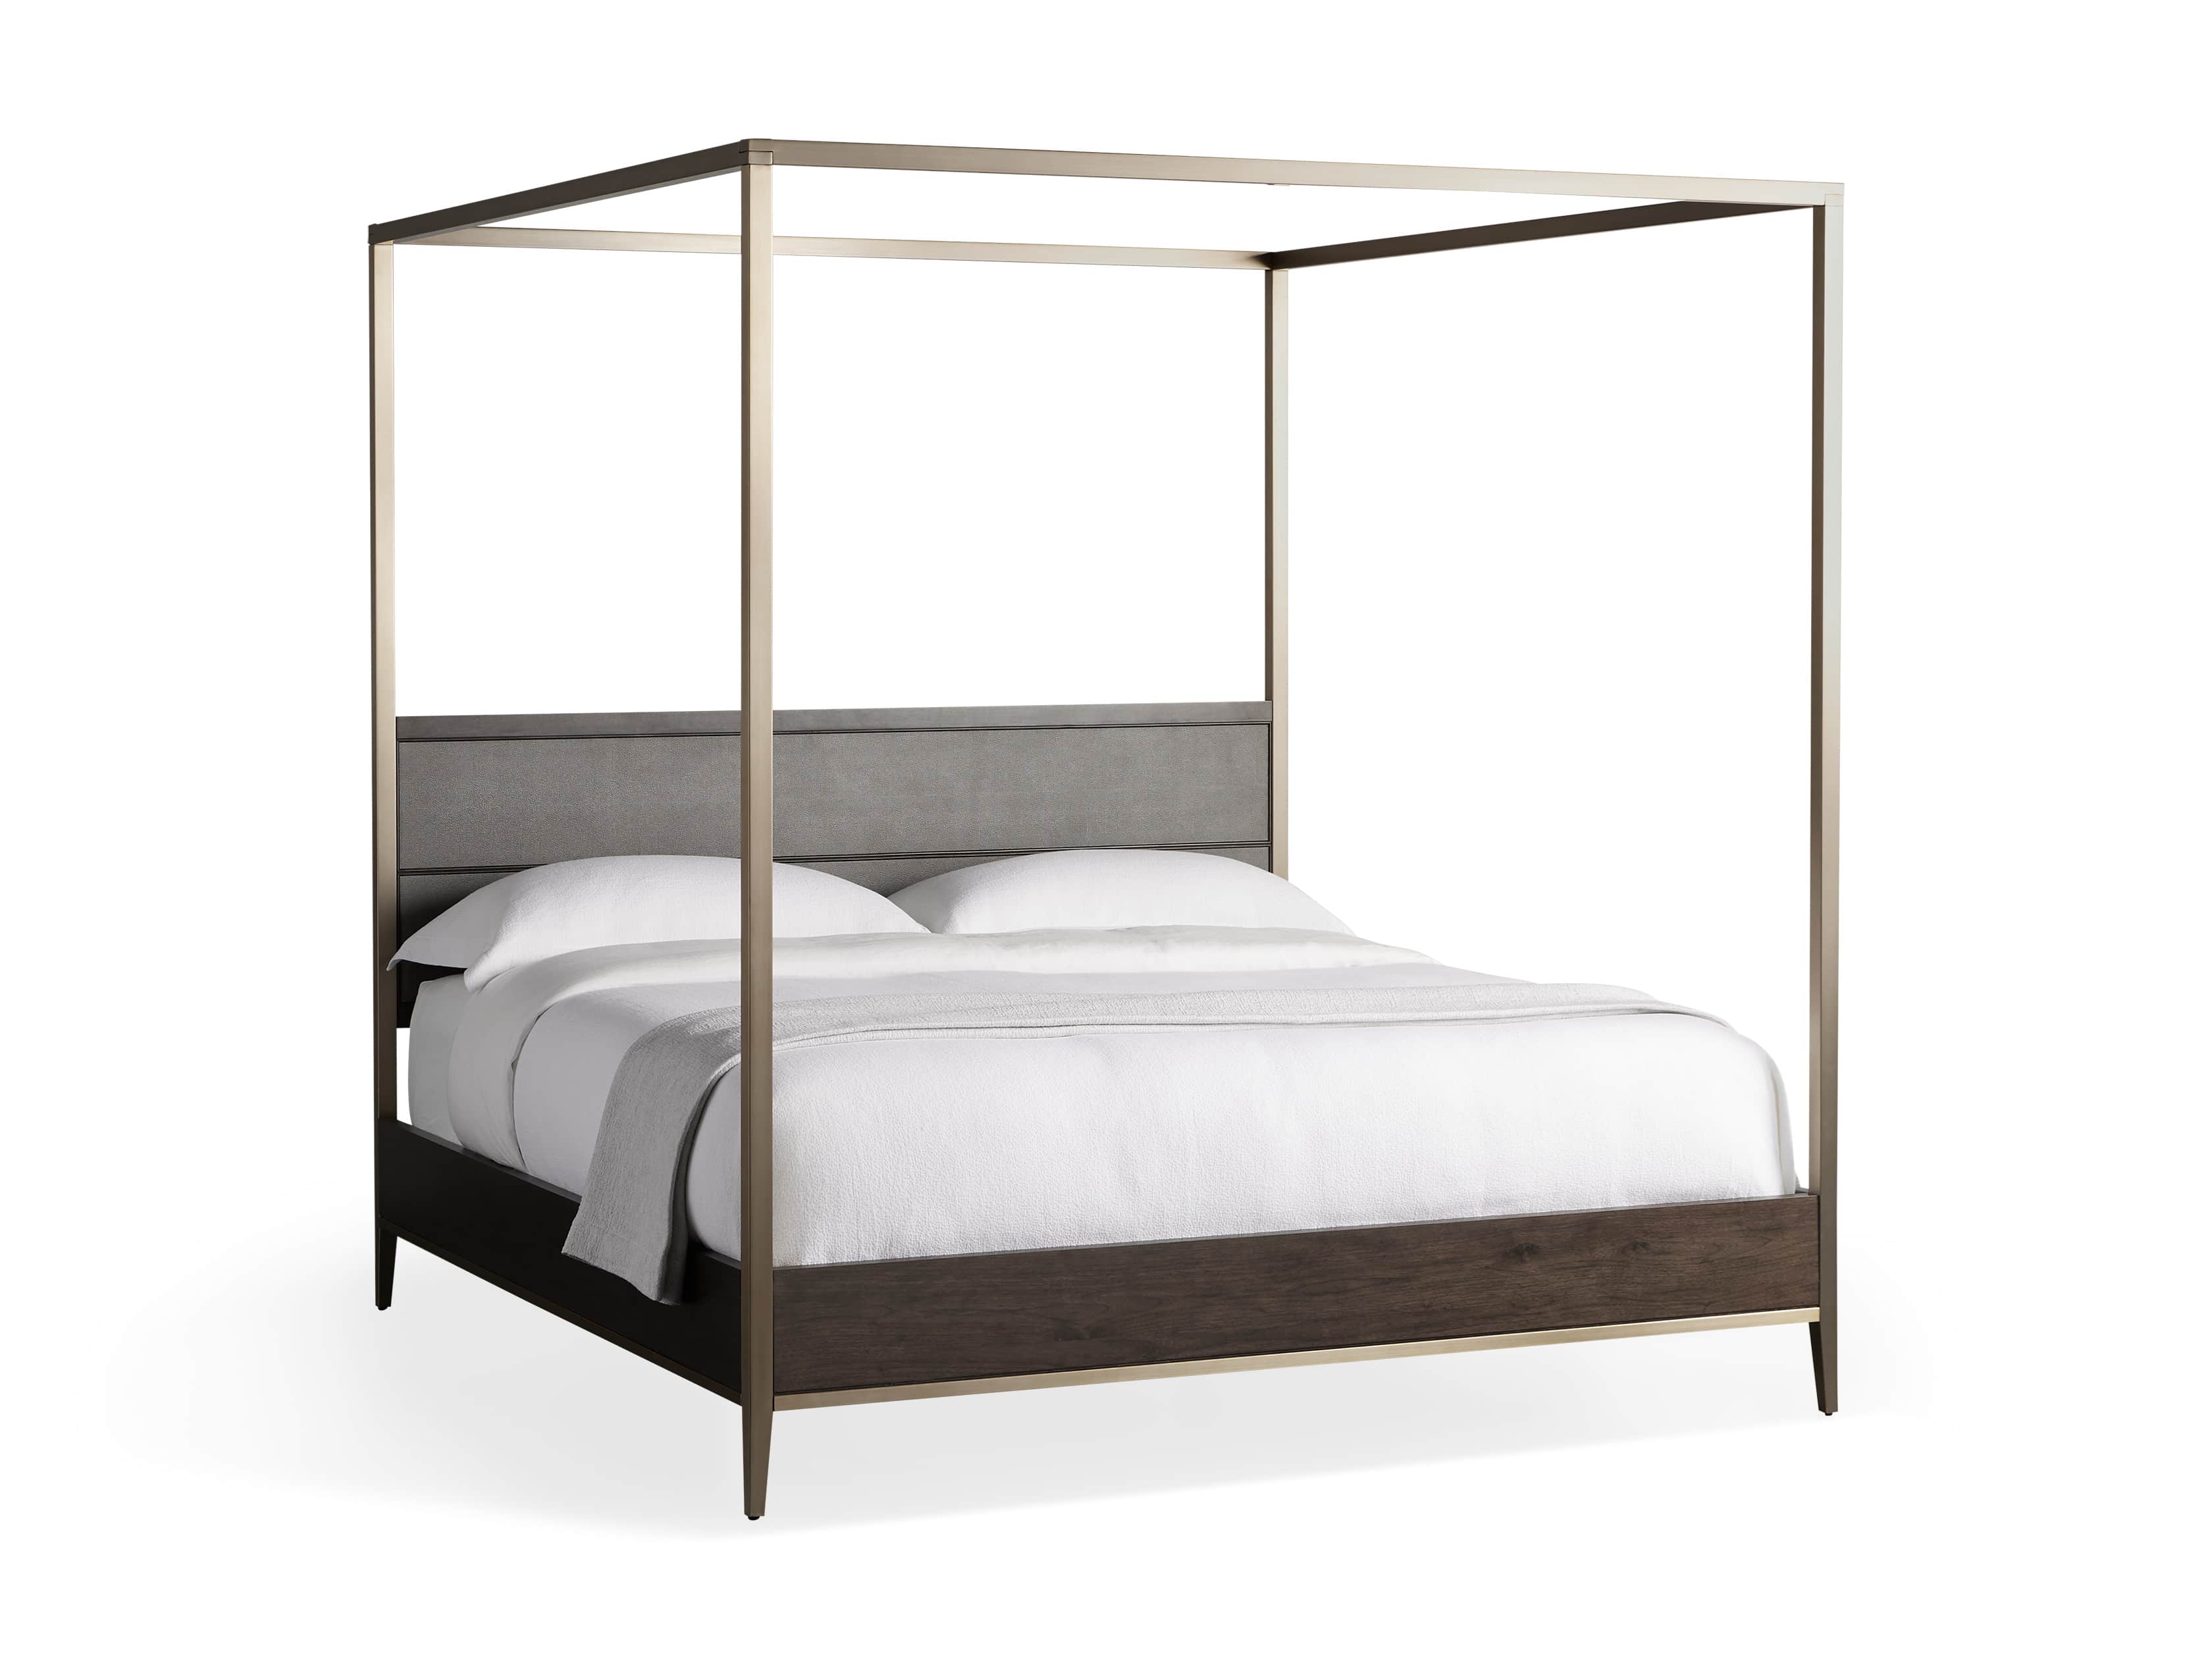 Malone Canopy Bed Arhaus, Canopy Bed Covers Queen